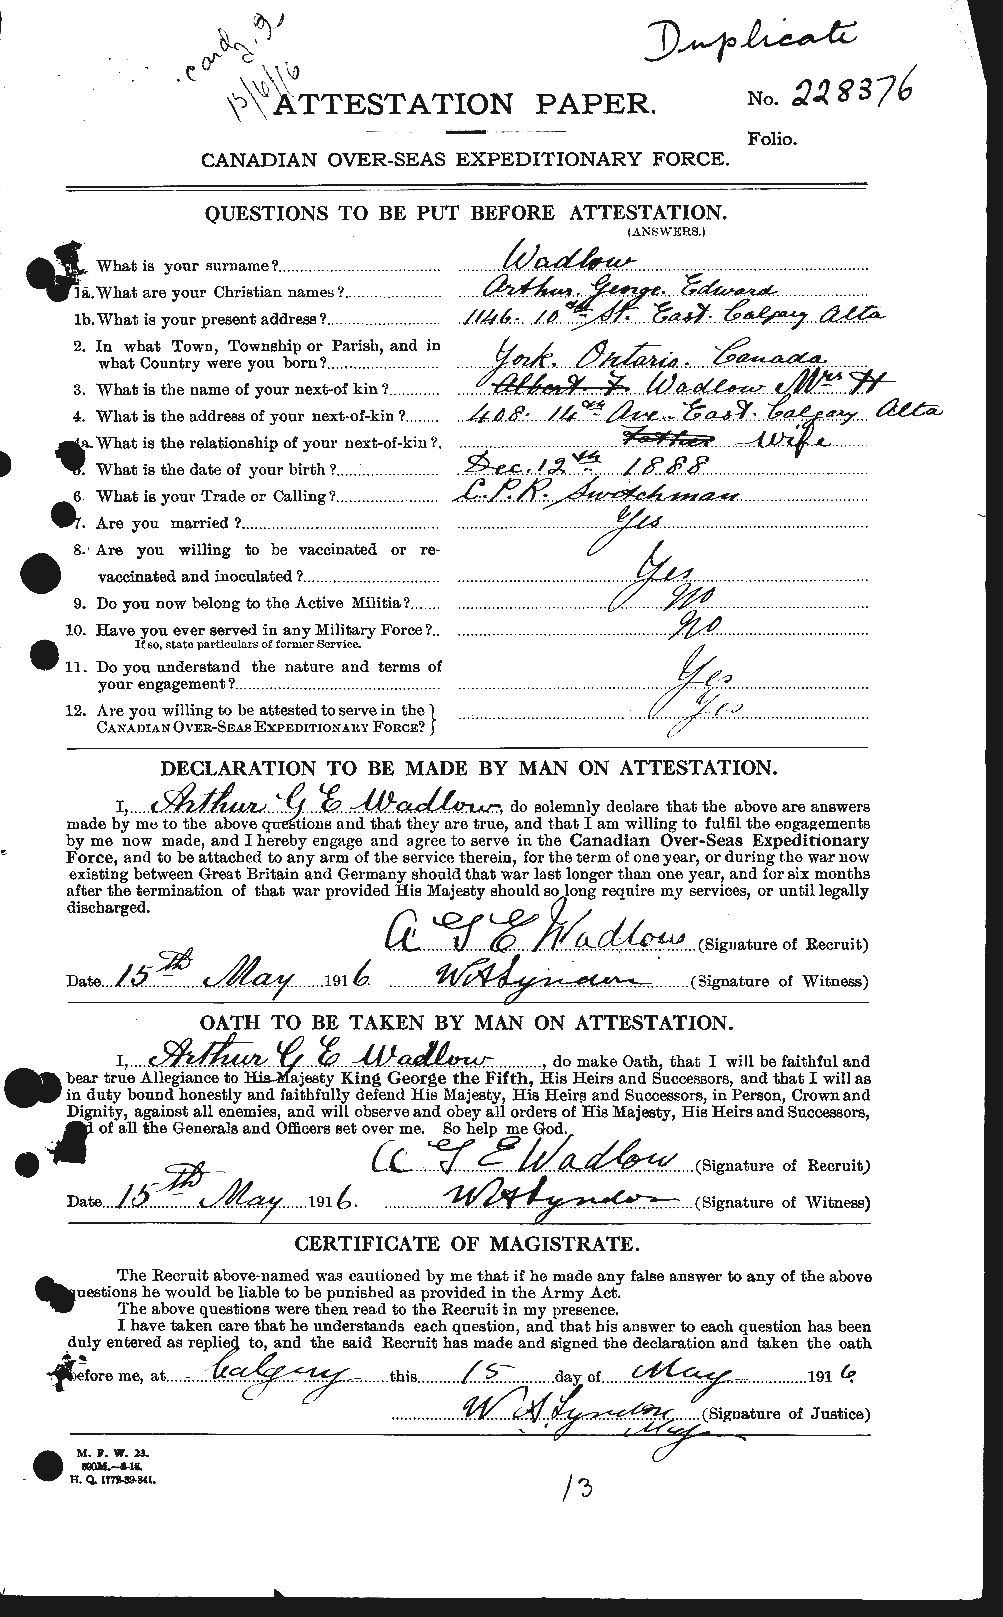 Personnel Records of the First World War - CEF 651366a